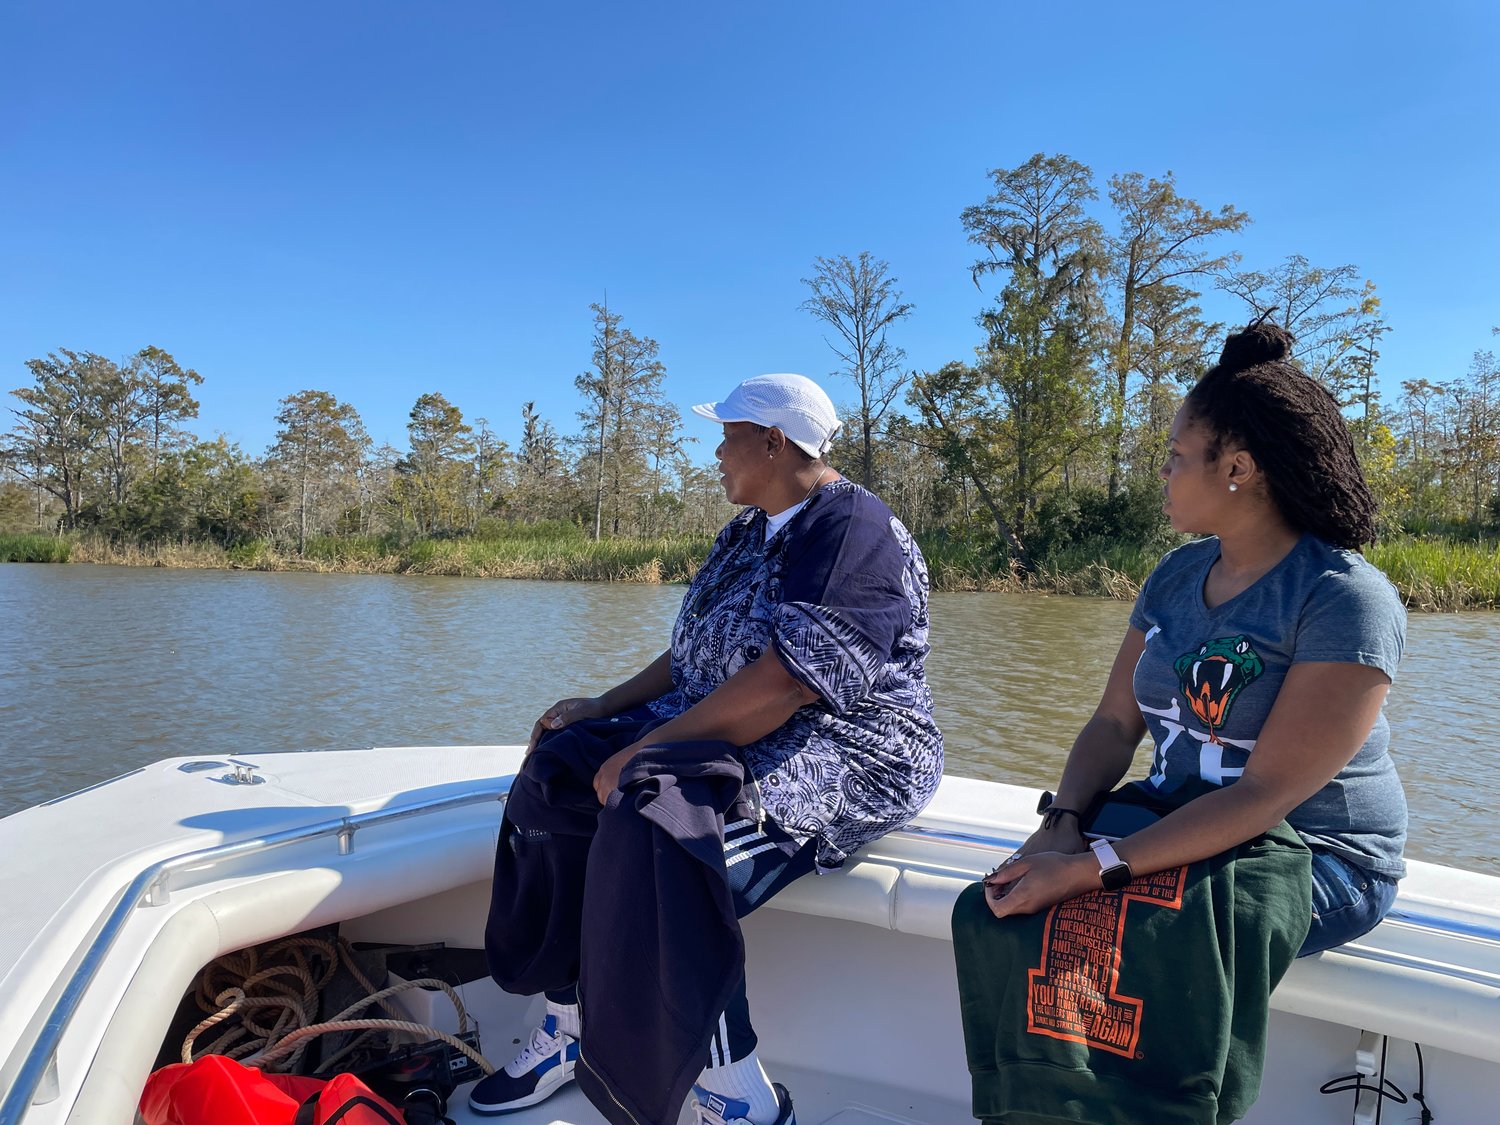 Author and historian Dr. Natalie Robertson and Delisha Marshall, descendant of Josephine and Gumpa Lee, travel to the Clotilda shipwreck site for the first time.